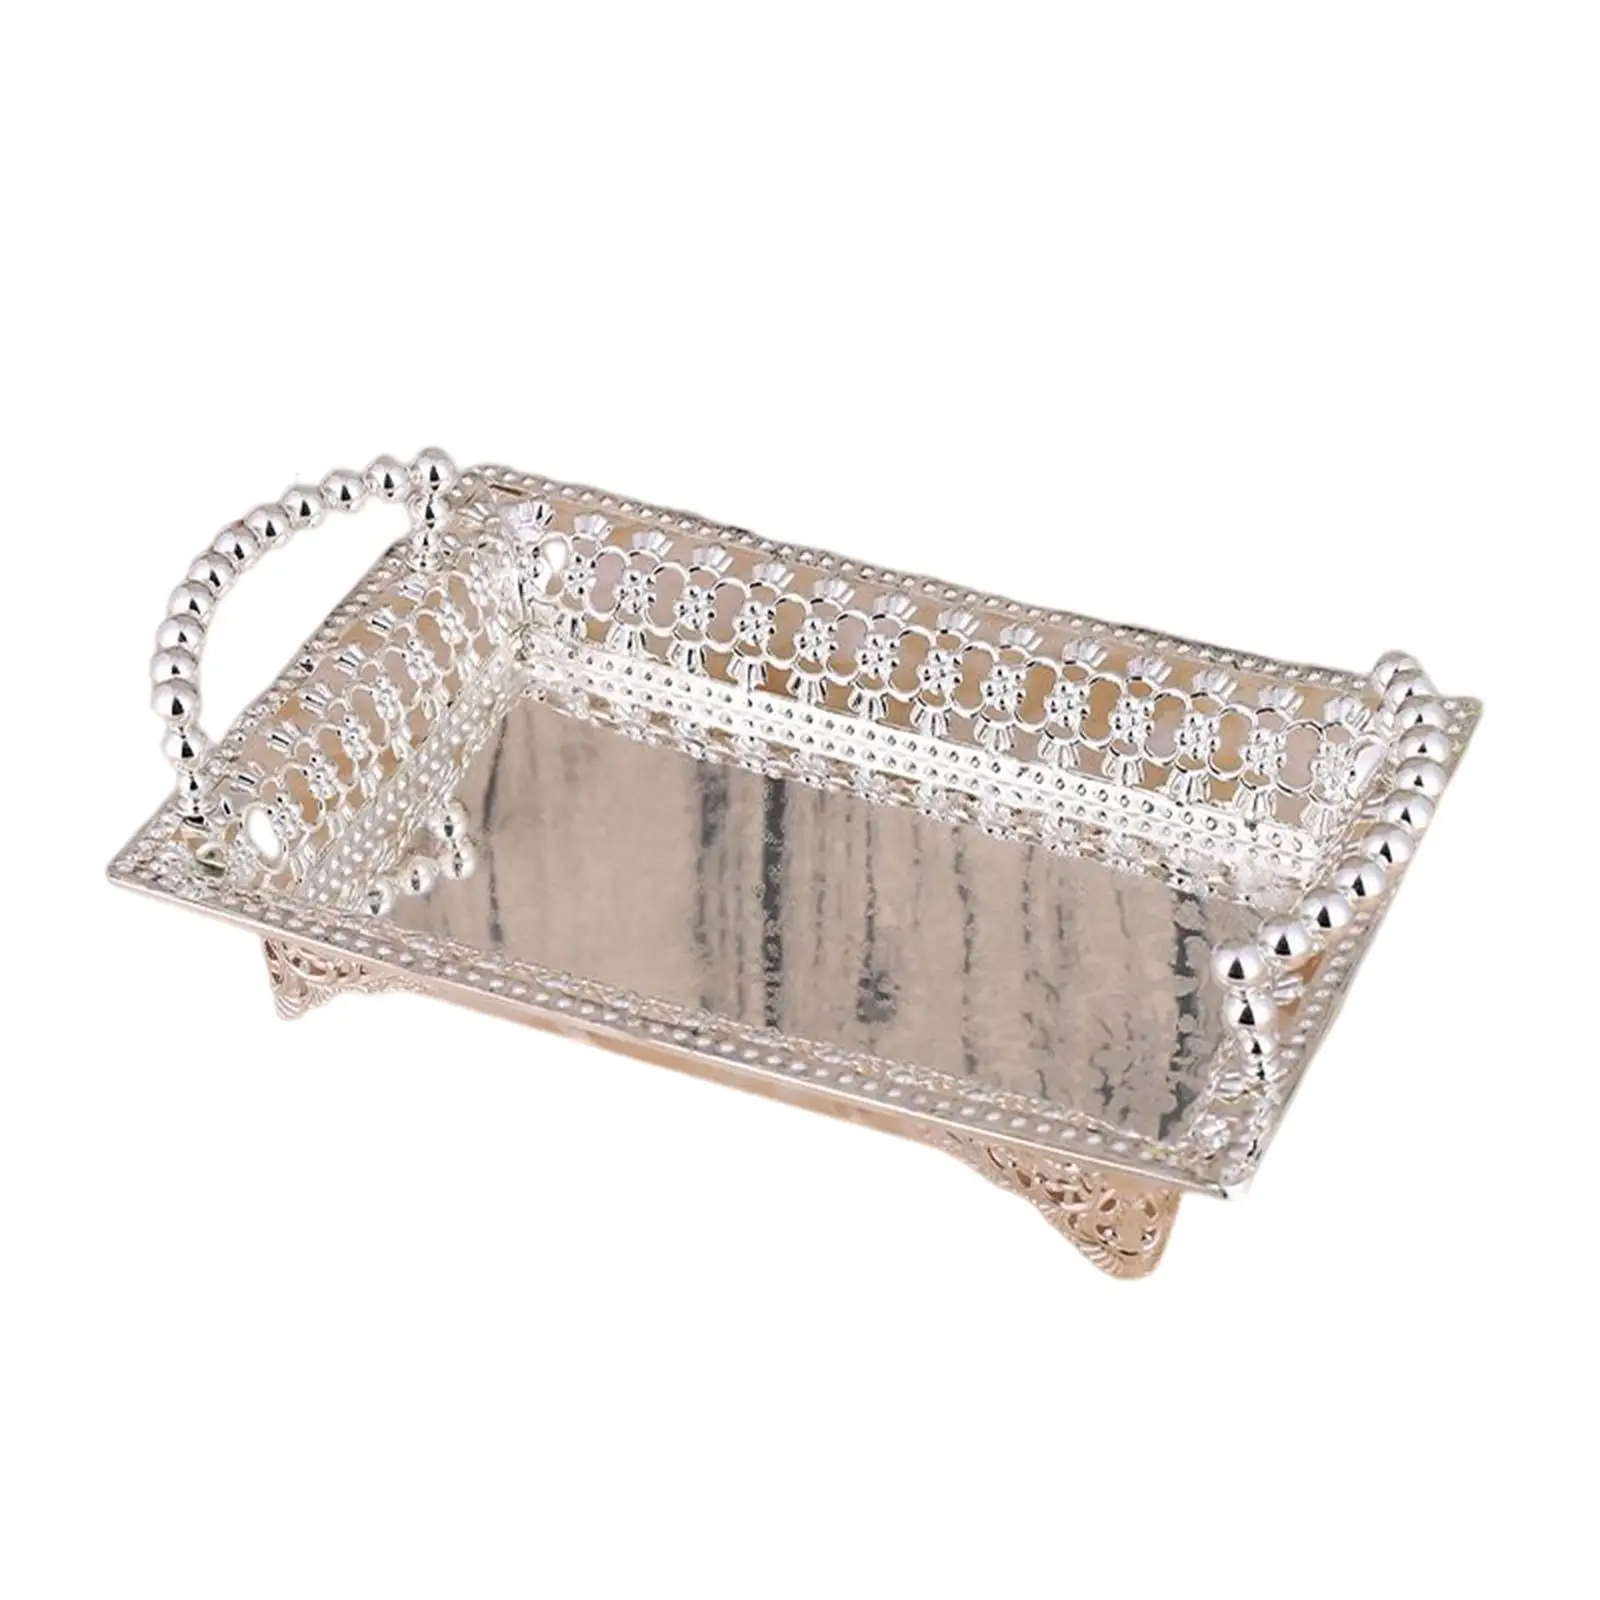 Dessert Cake Serving Tray Food Pastry Dessert Display Holder Jewelry Organizer Fruit Plates Decorative Serving Tray for Party